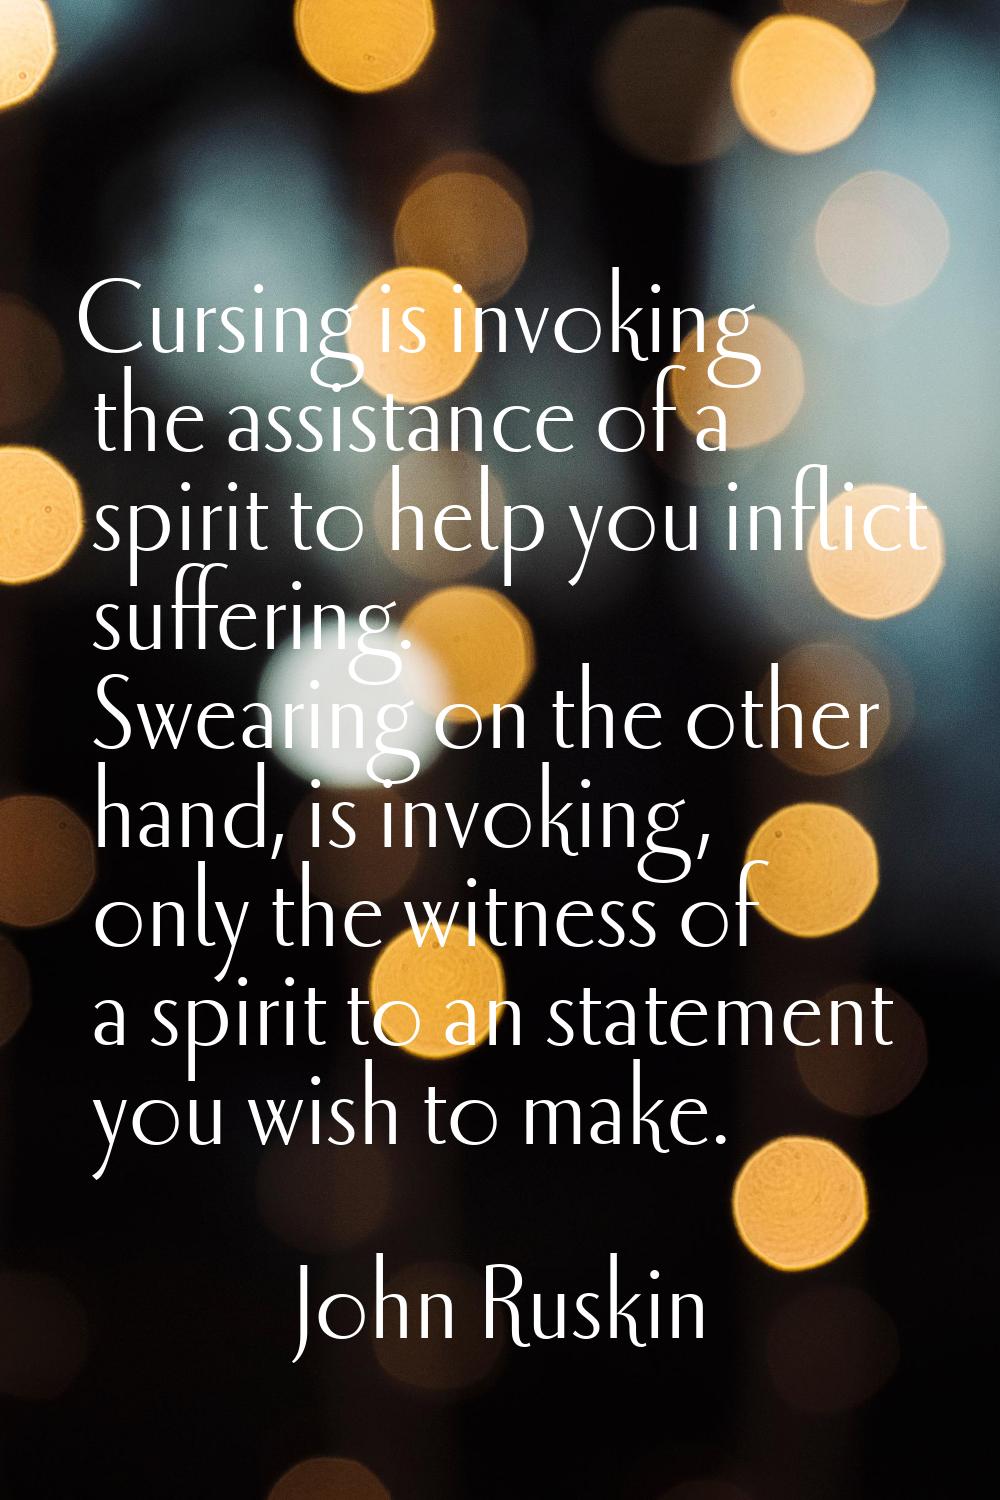 Cursing is invoking the assistance of a spirit to help you inflict suffering. Swearing on the other